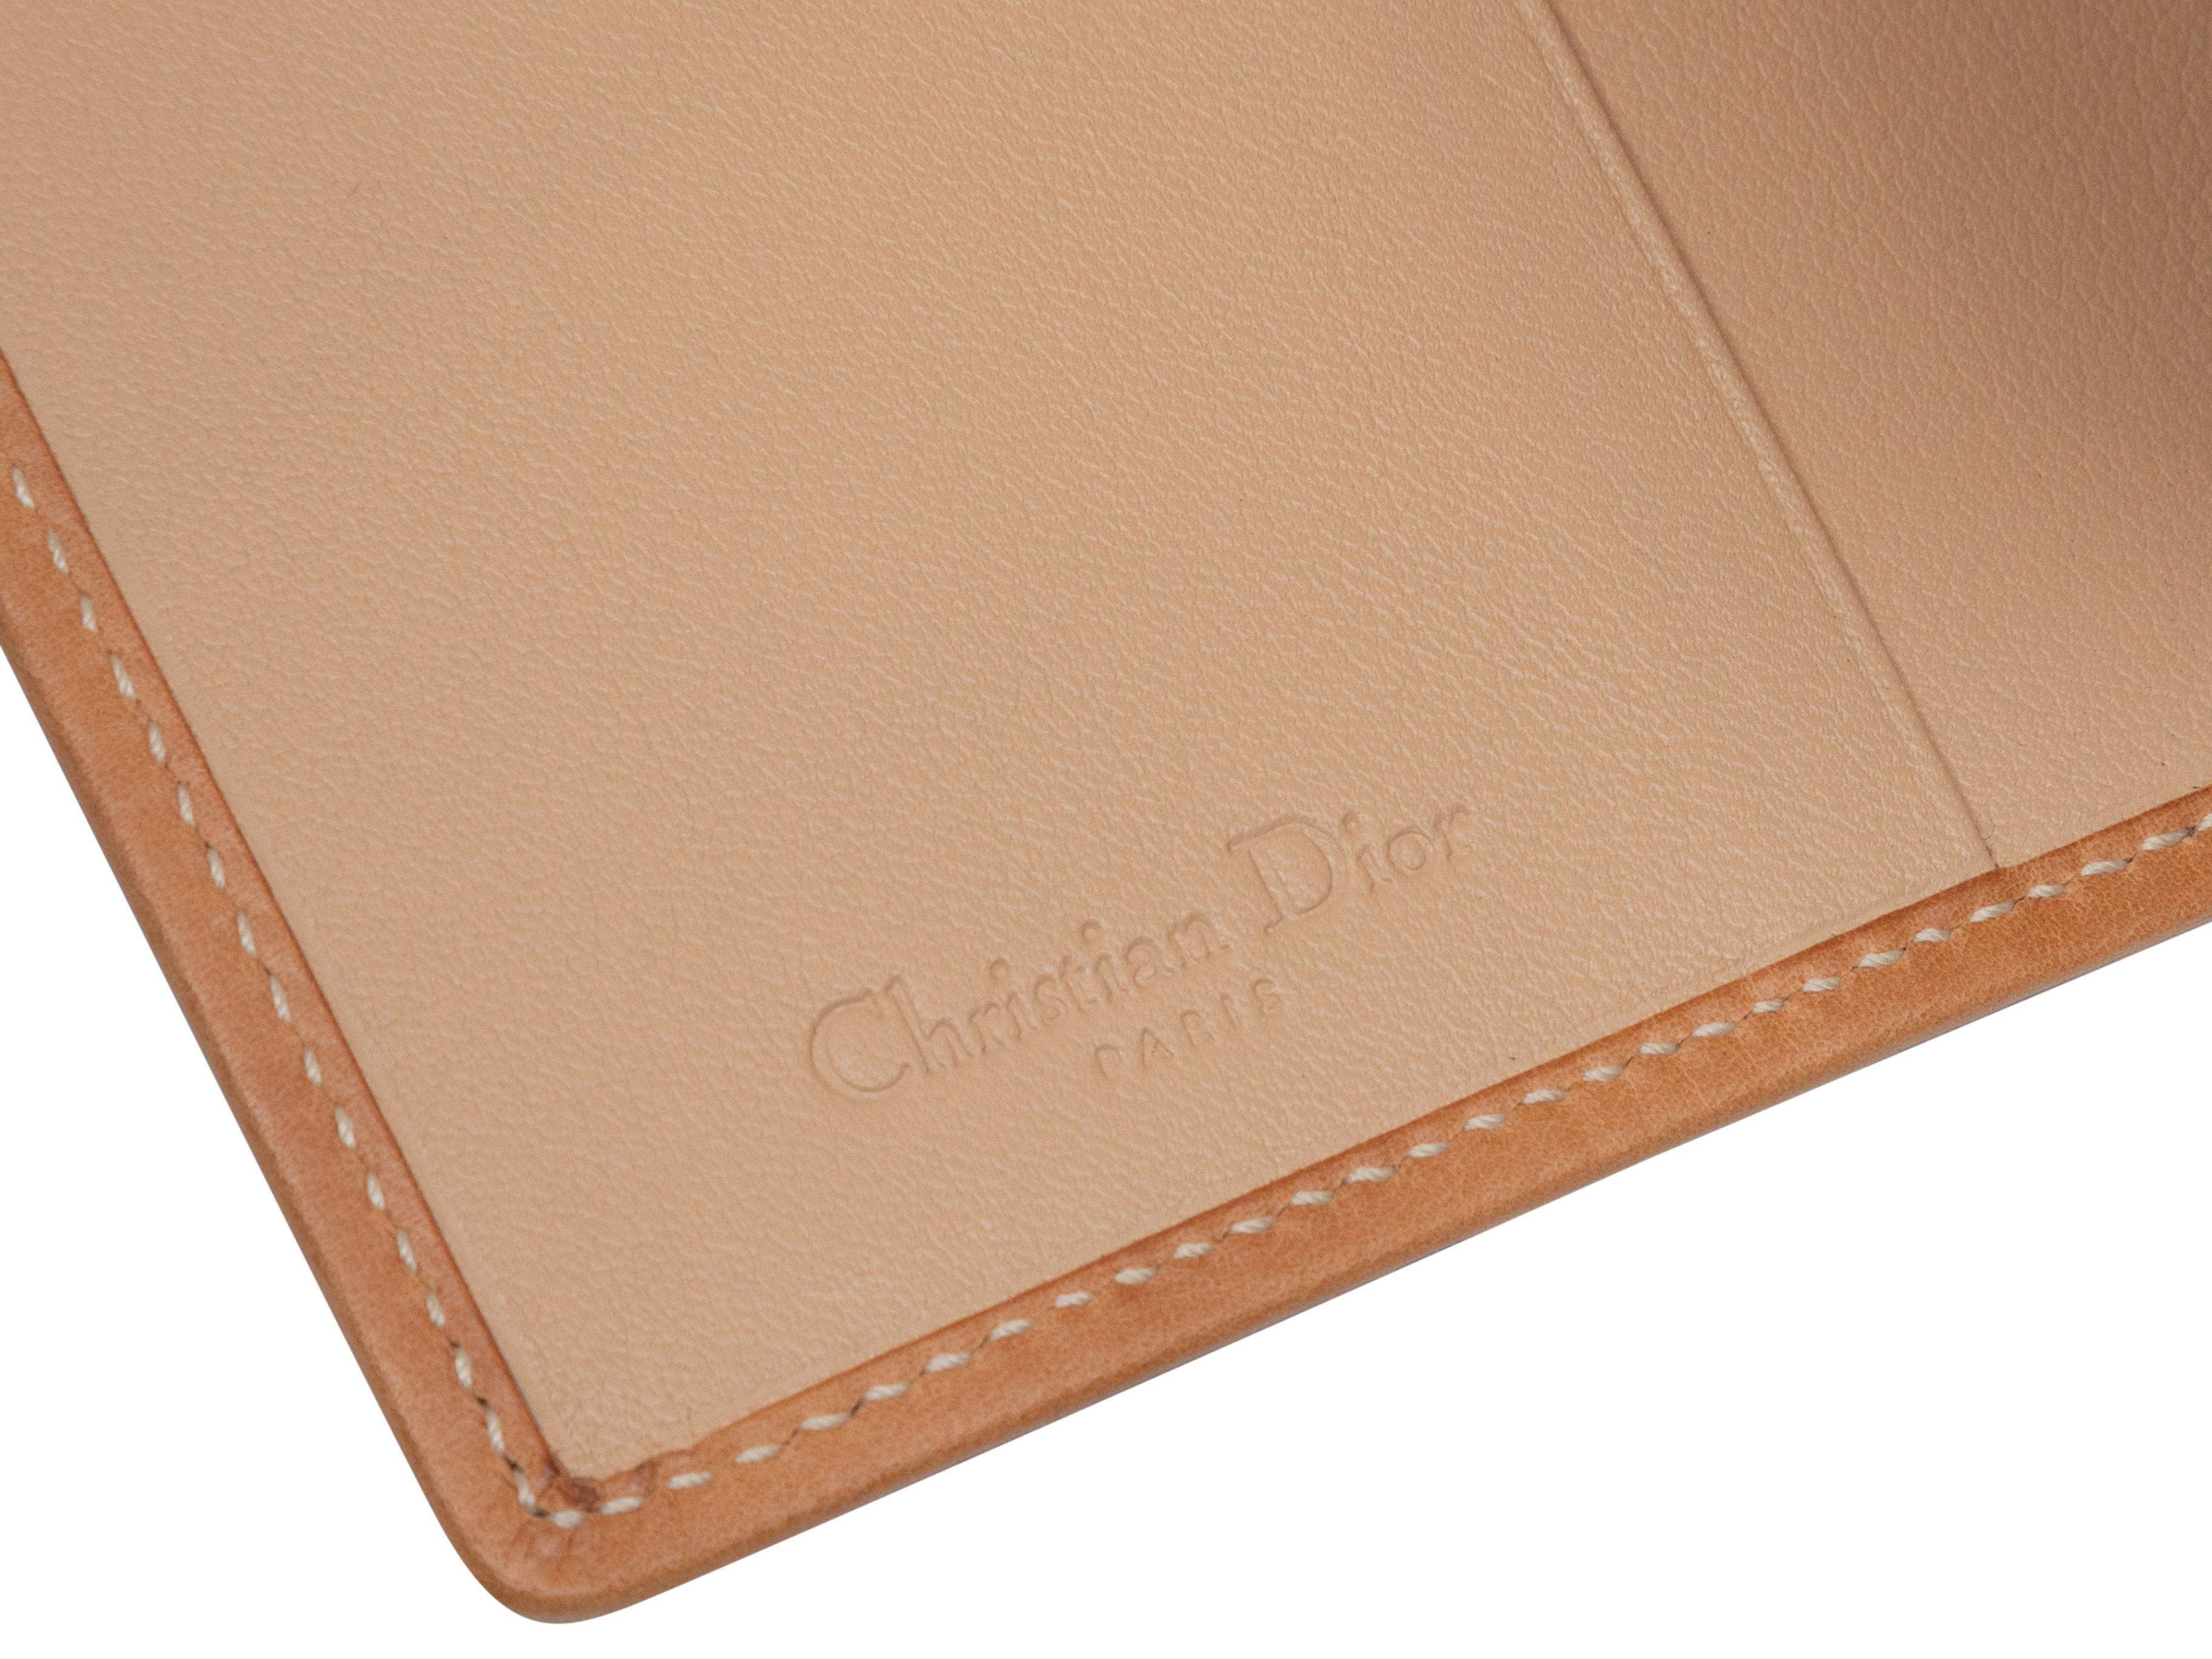 Product Details: Tan Oblique patterned canvas and leather-trimmed passport holder by Christian Dior. 5.5